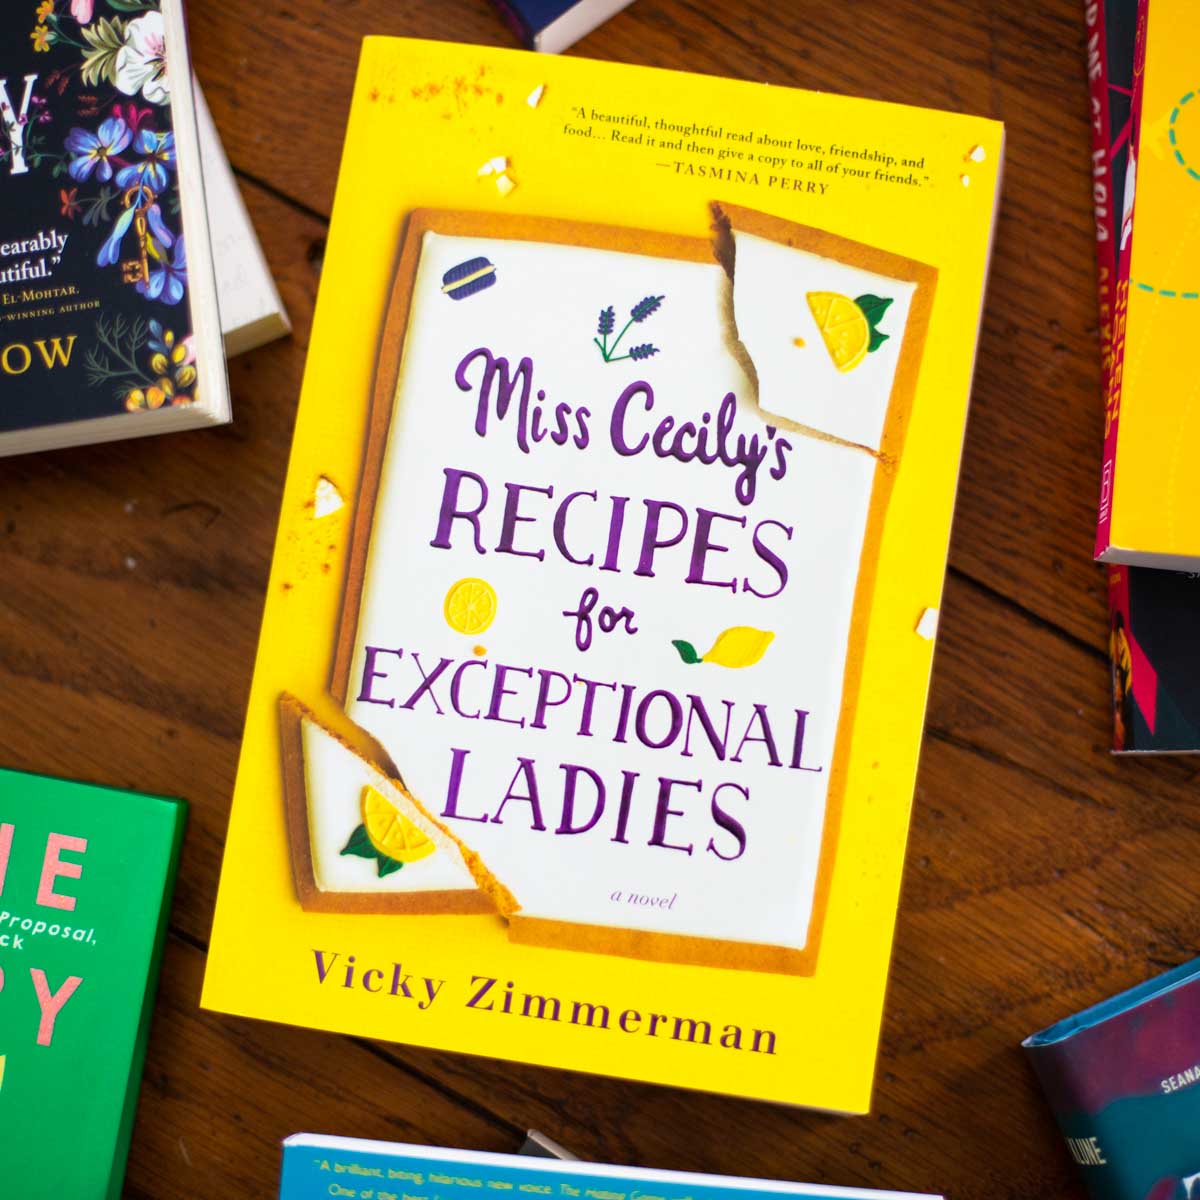 A copy of the book Miss Cecily's Recipes is on the table.